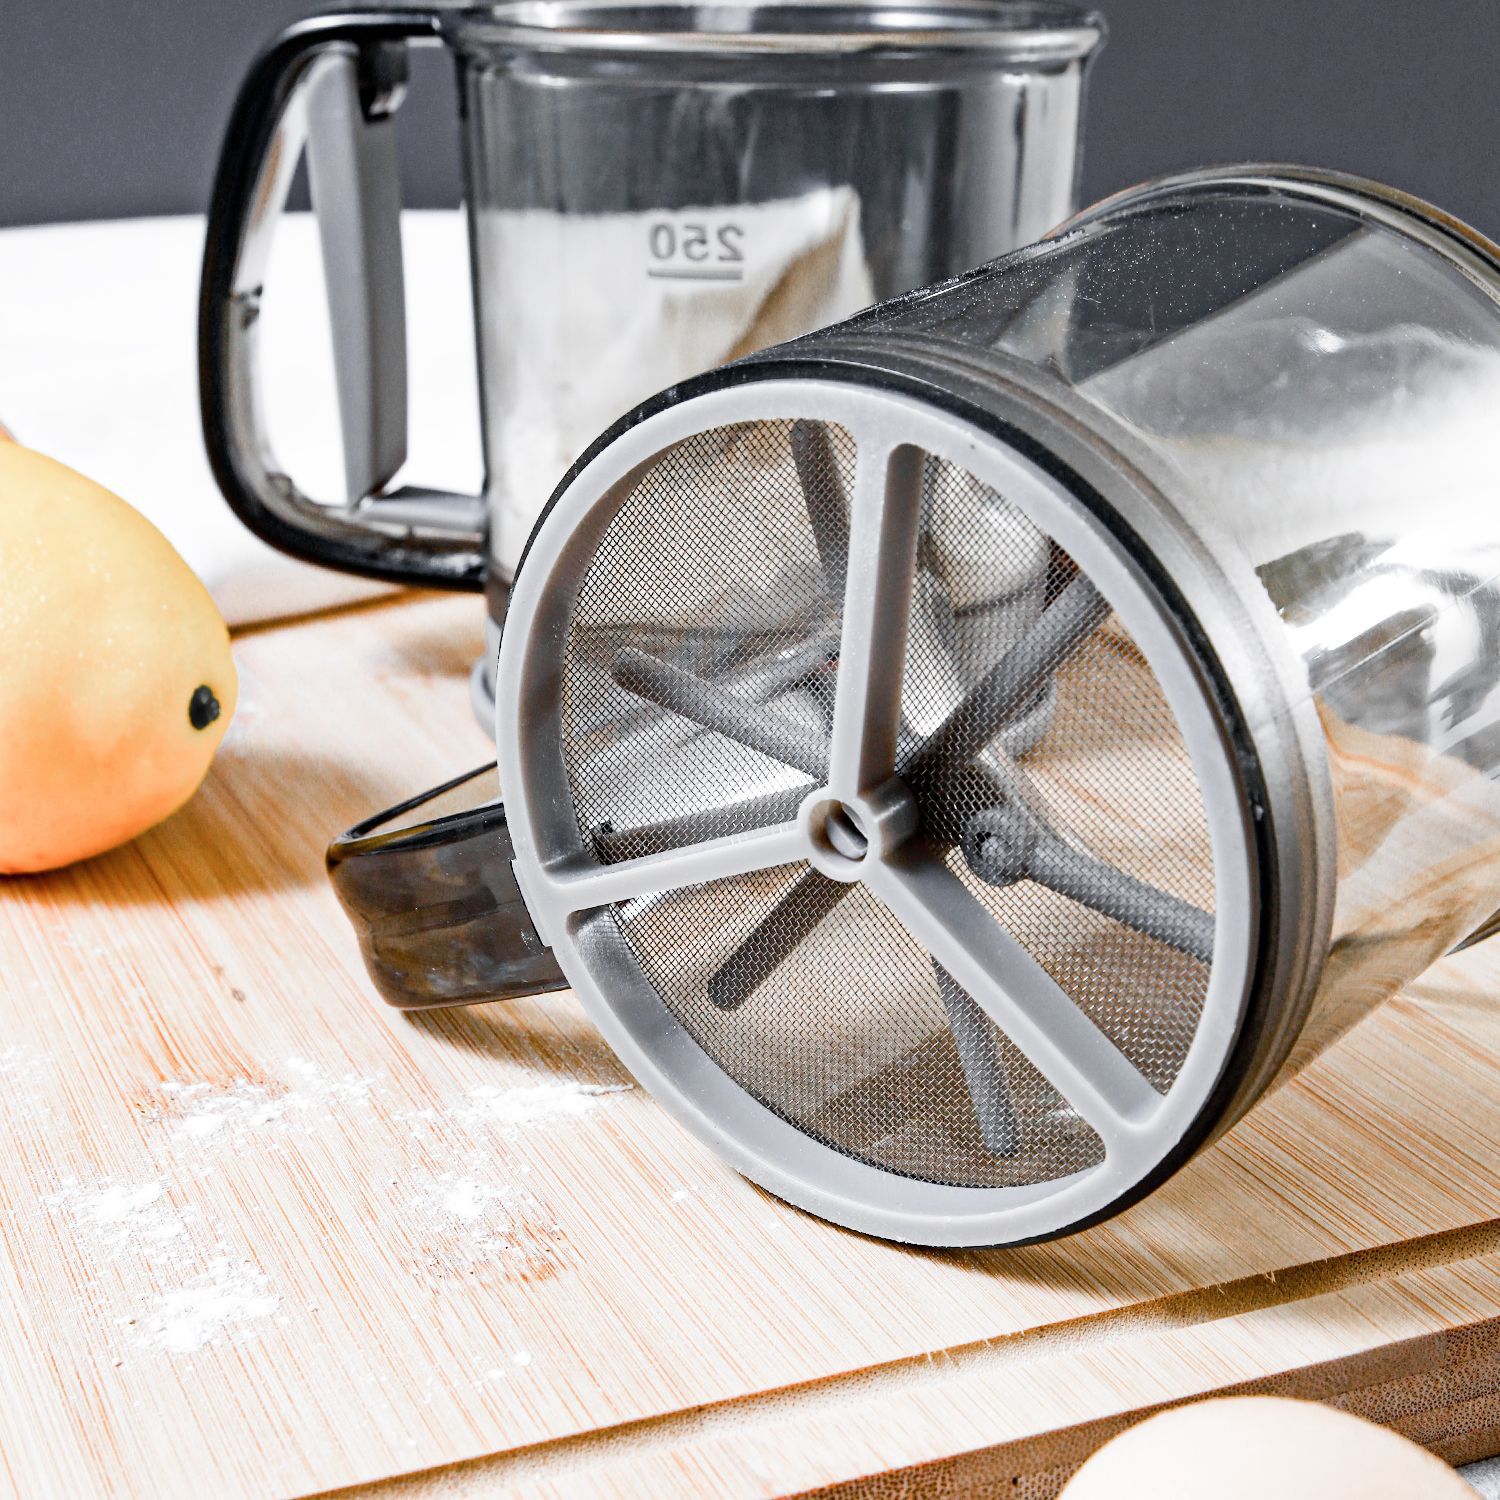 New Hot Sale Flour Sifter Powder Sieve Semi-automatic Handheld Flour Sifter Powder Sieve Baking Tool Transparent Hand Pressure Double Layer Flour Sifter Powder Sieve